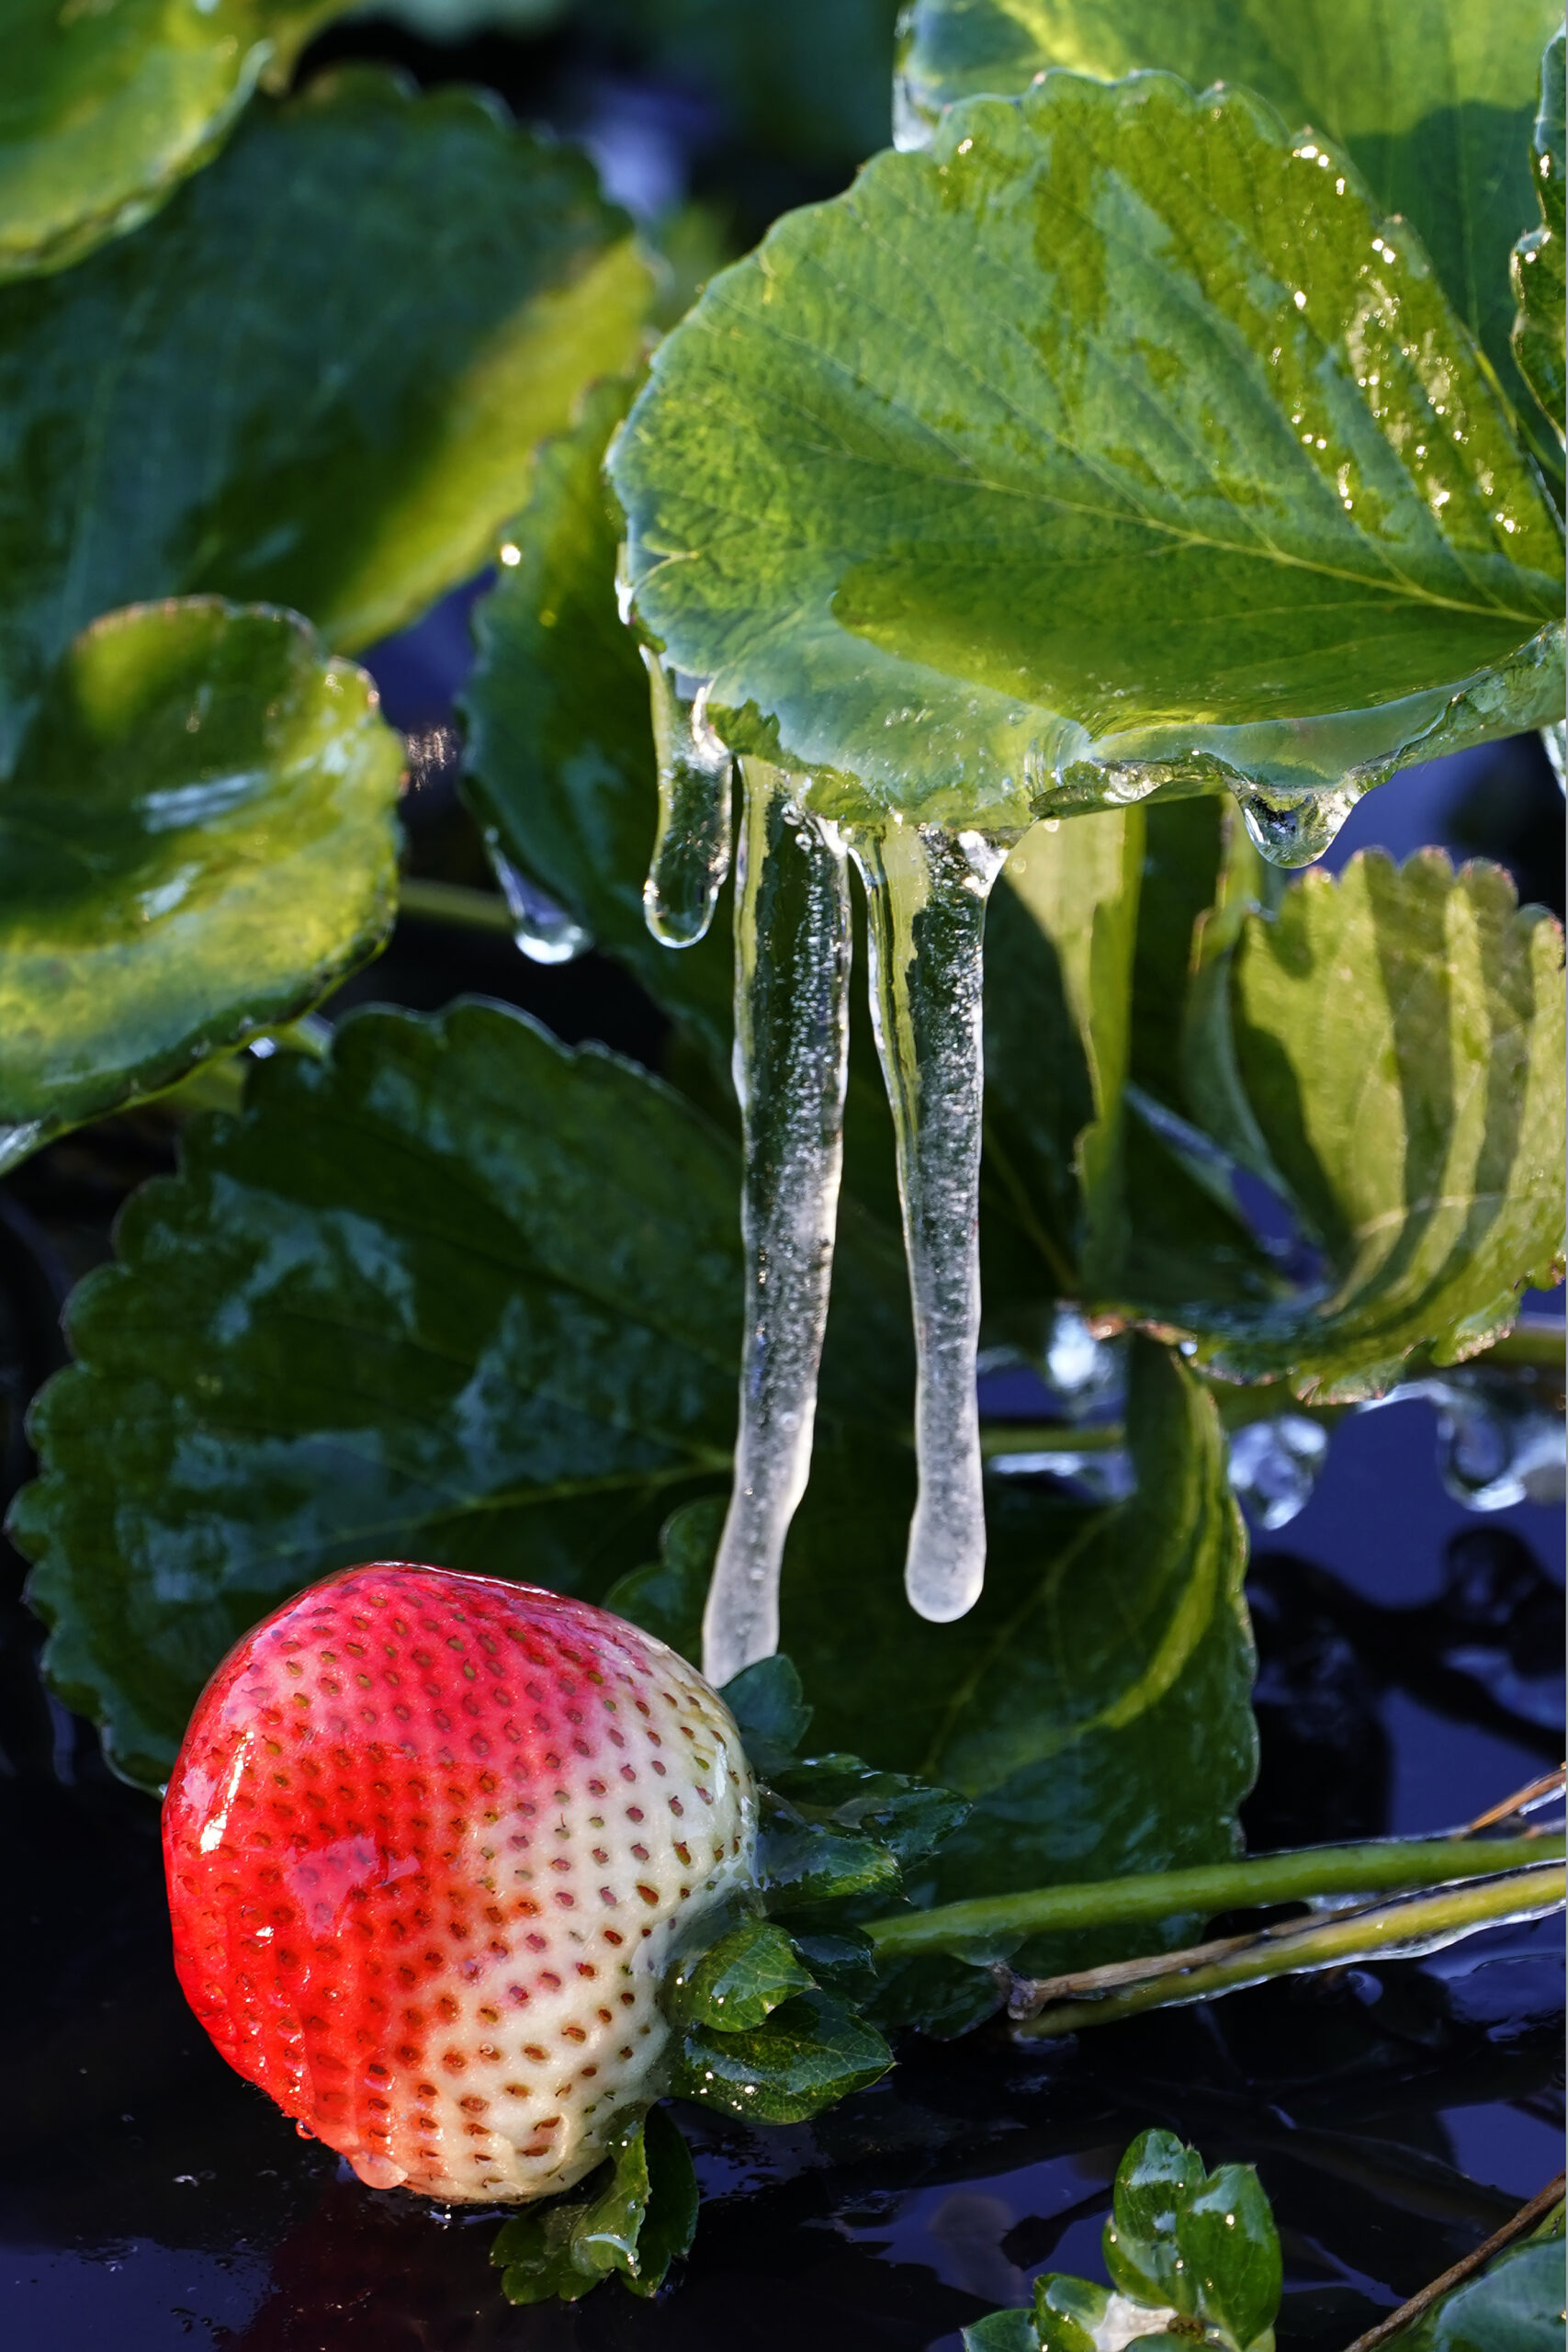 Ice clings to a strawberry in a field Sunday, Jan. 30, 2022, in Plant City, Fla. Farmers spray water on their crops to help keep the fruit from getting damaged by the cold. Temperatures overnight dipped into the mid-20's. (AP Photo/Chris O'Meara)